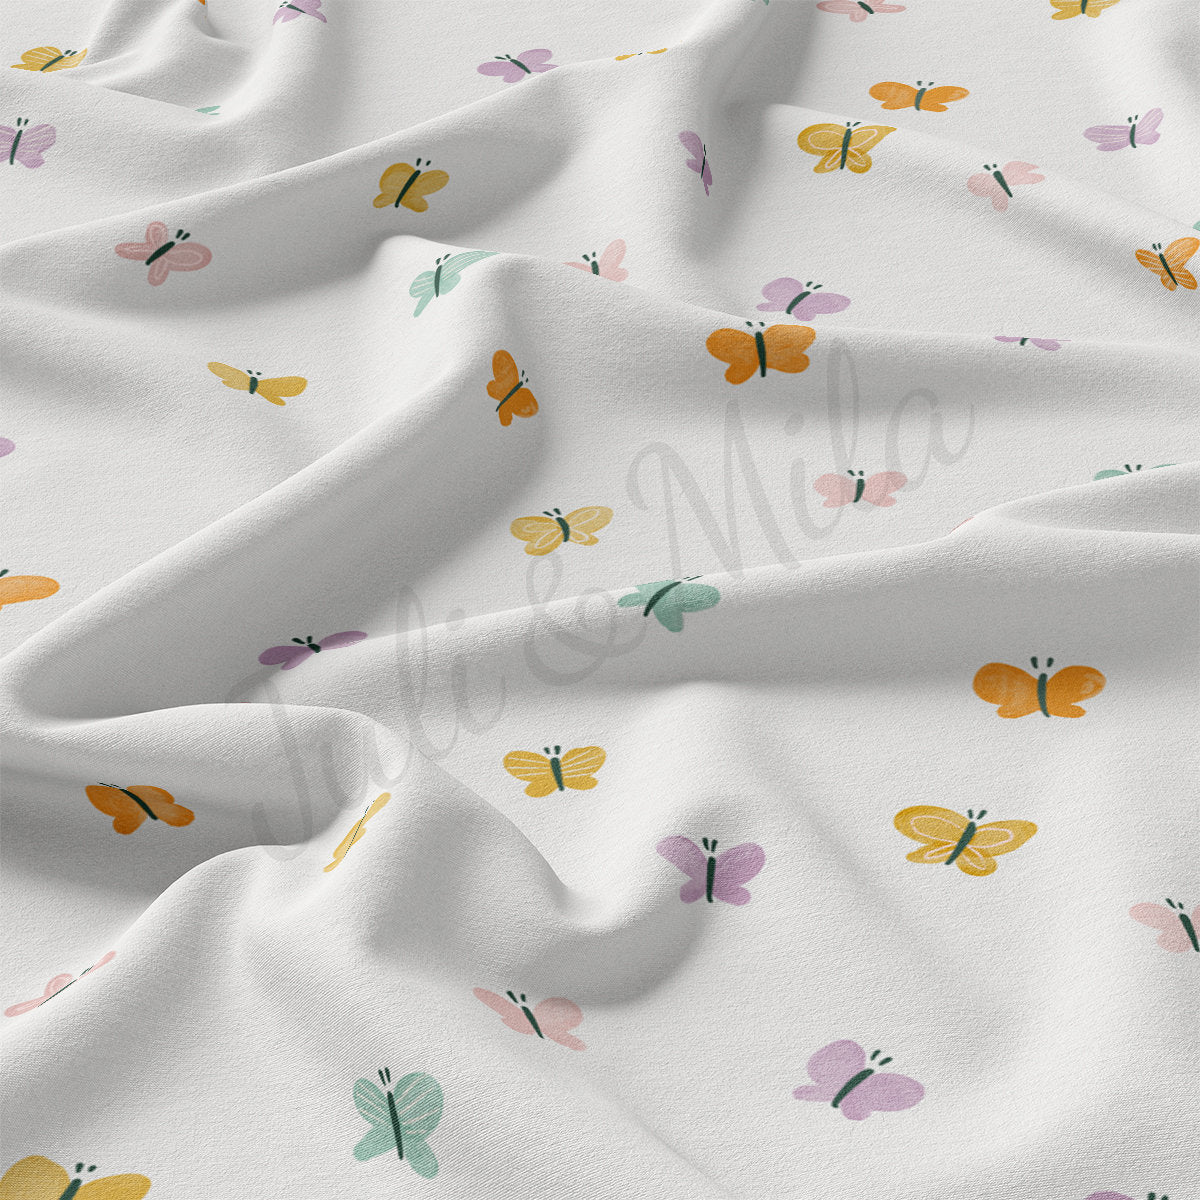 DBP Fabric Double Brushed Polyester DBP2449 Butterflies